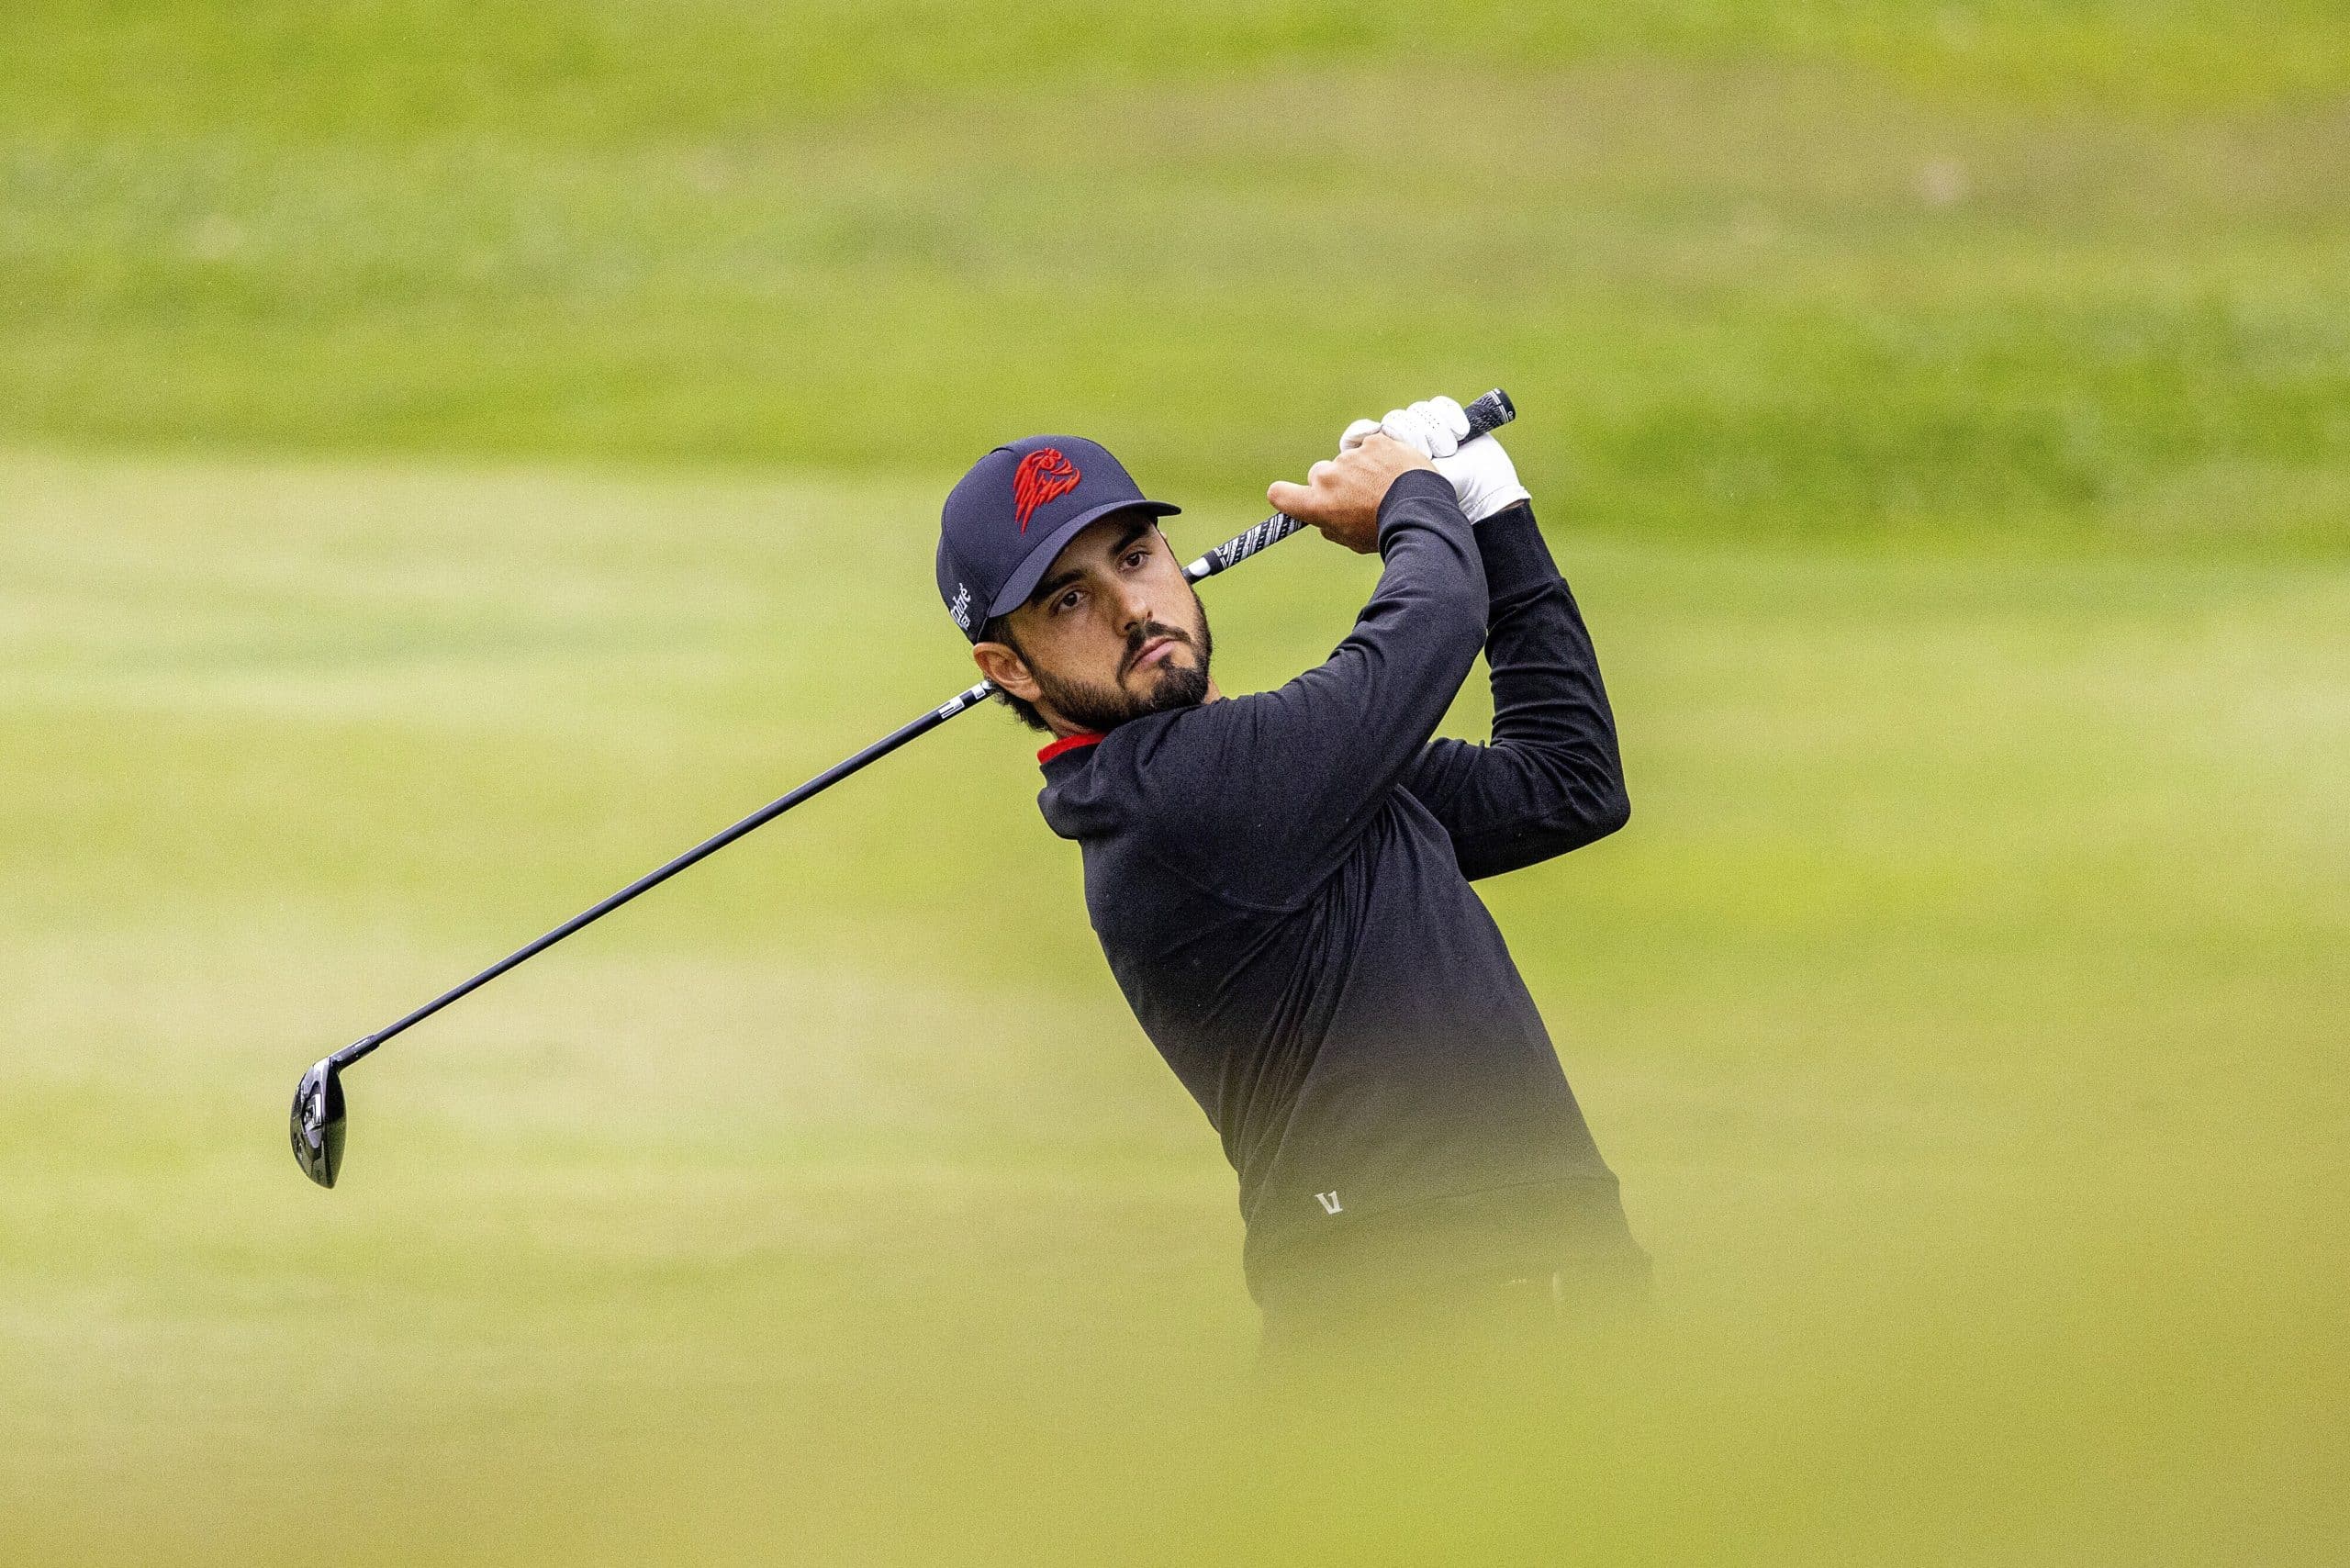 Abraham Ancer beats Cameron Smith, Paul Casey in playoff to win LIV